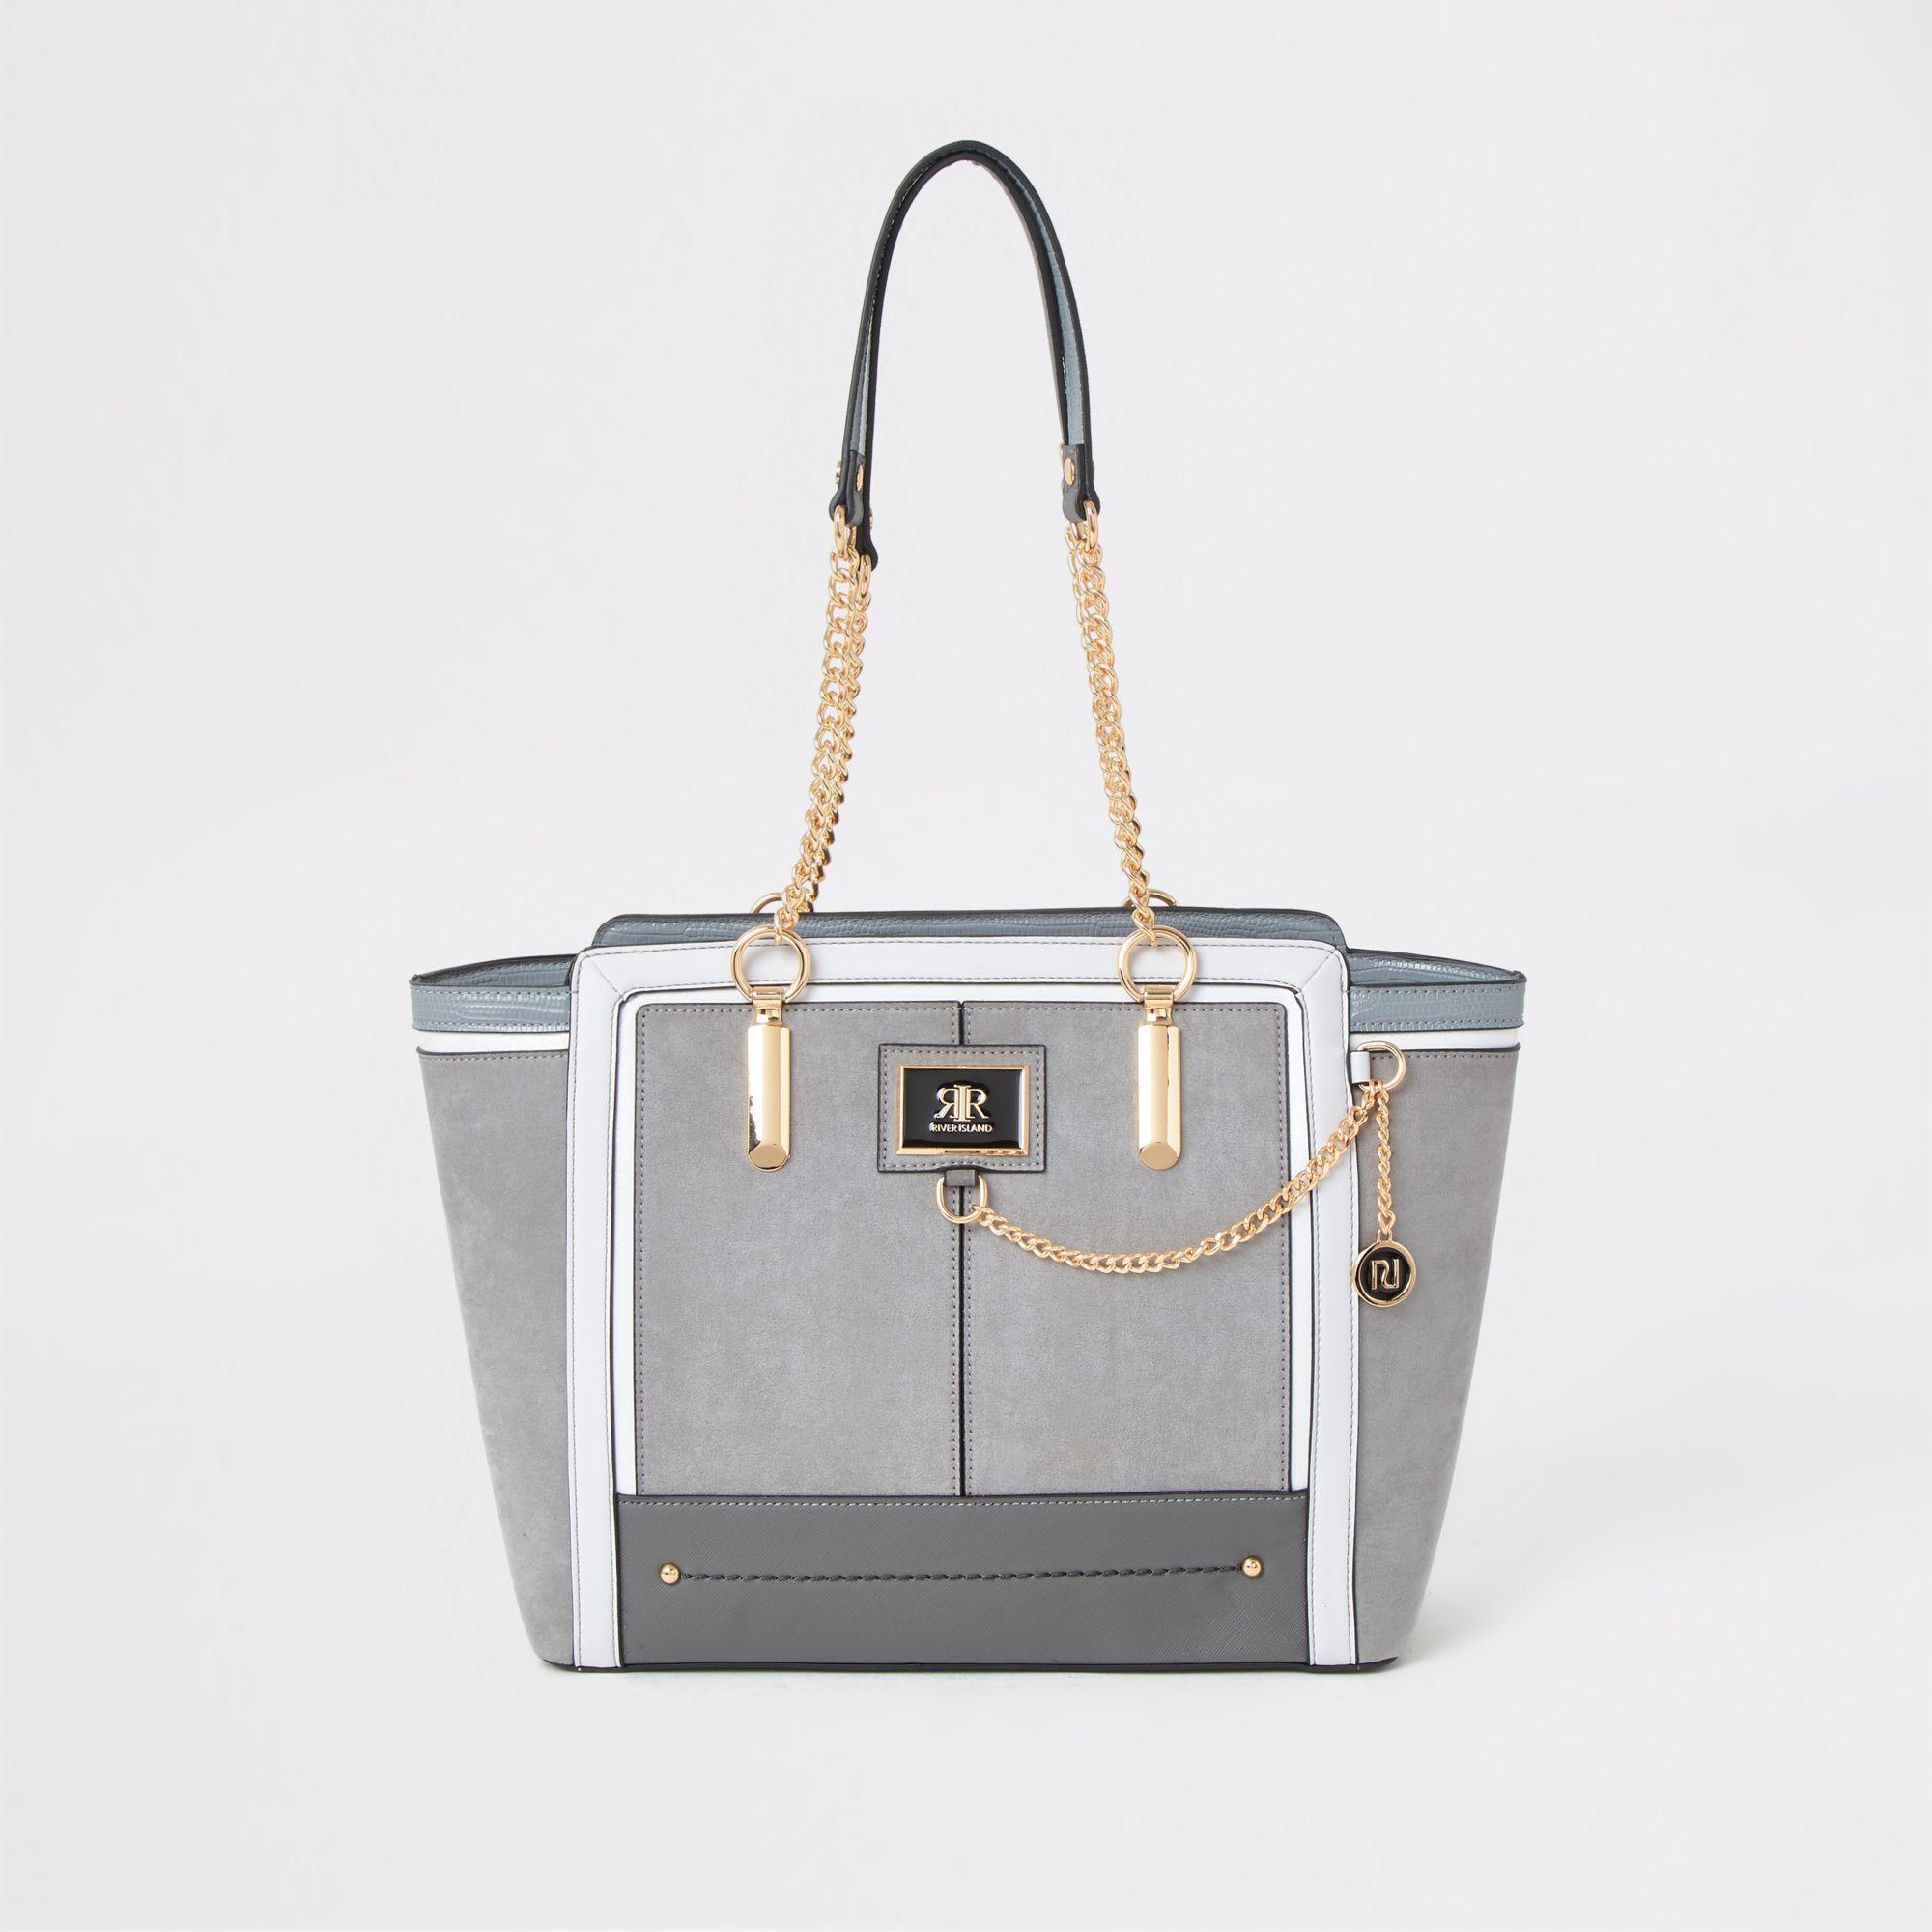 River Island Synthetic Grey Chain Front Winged Tote Bag in Gray - Lyst